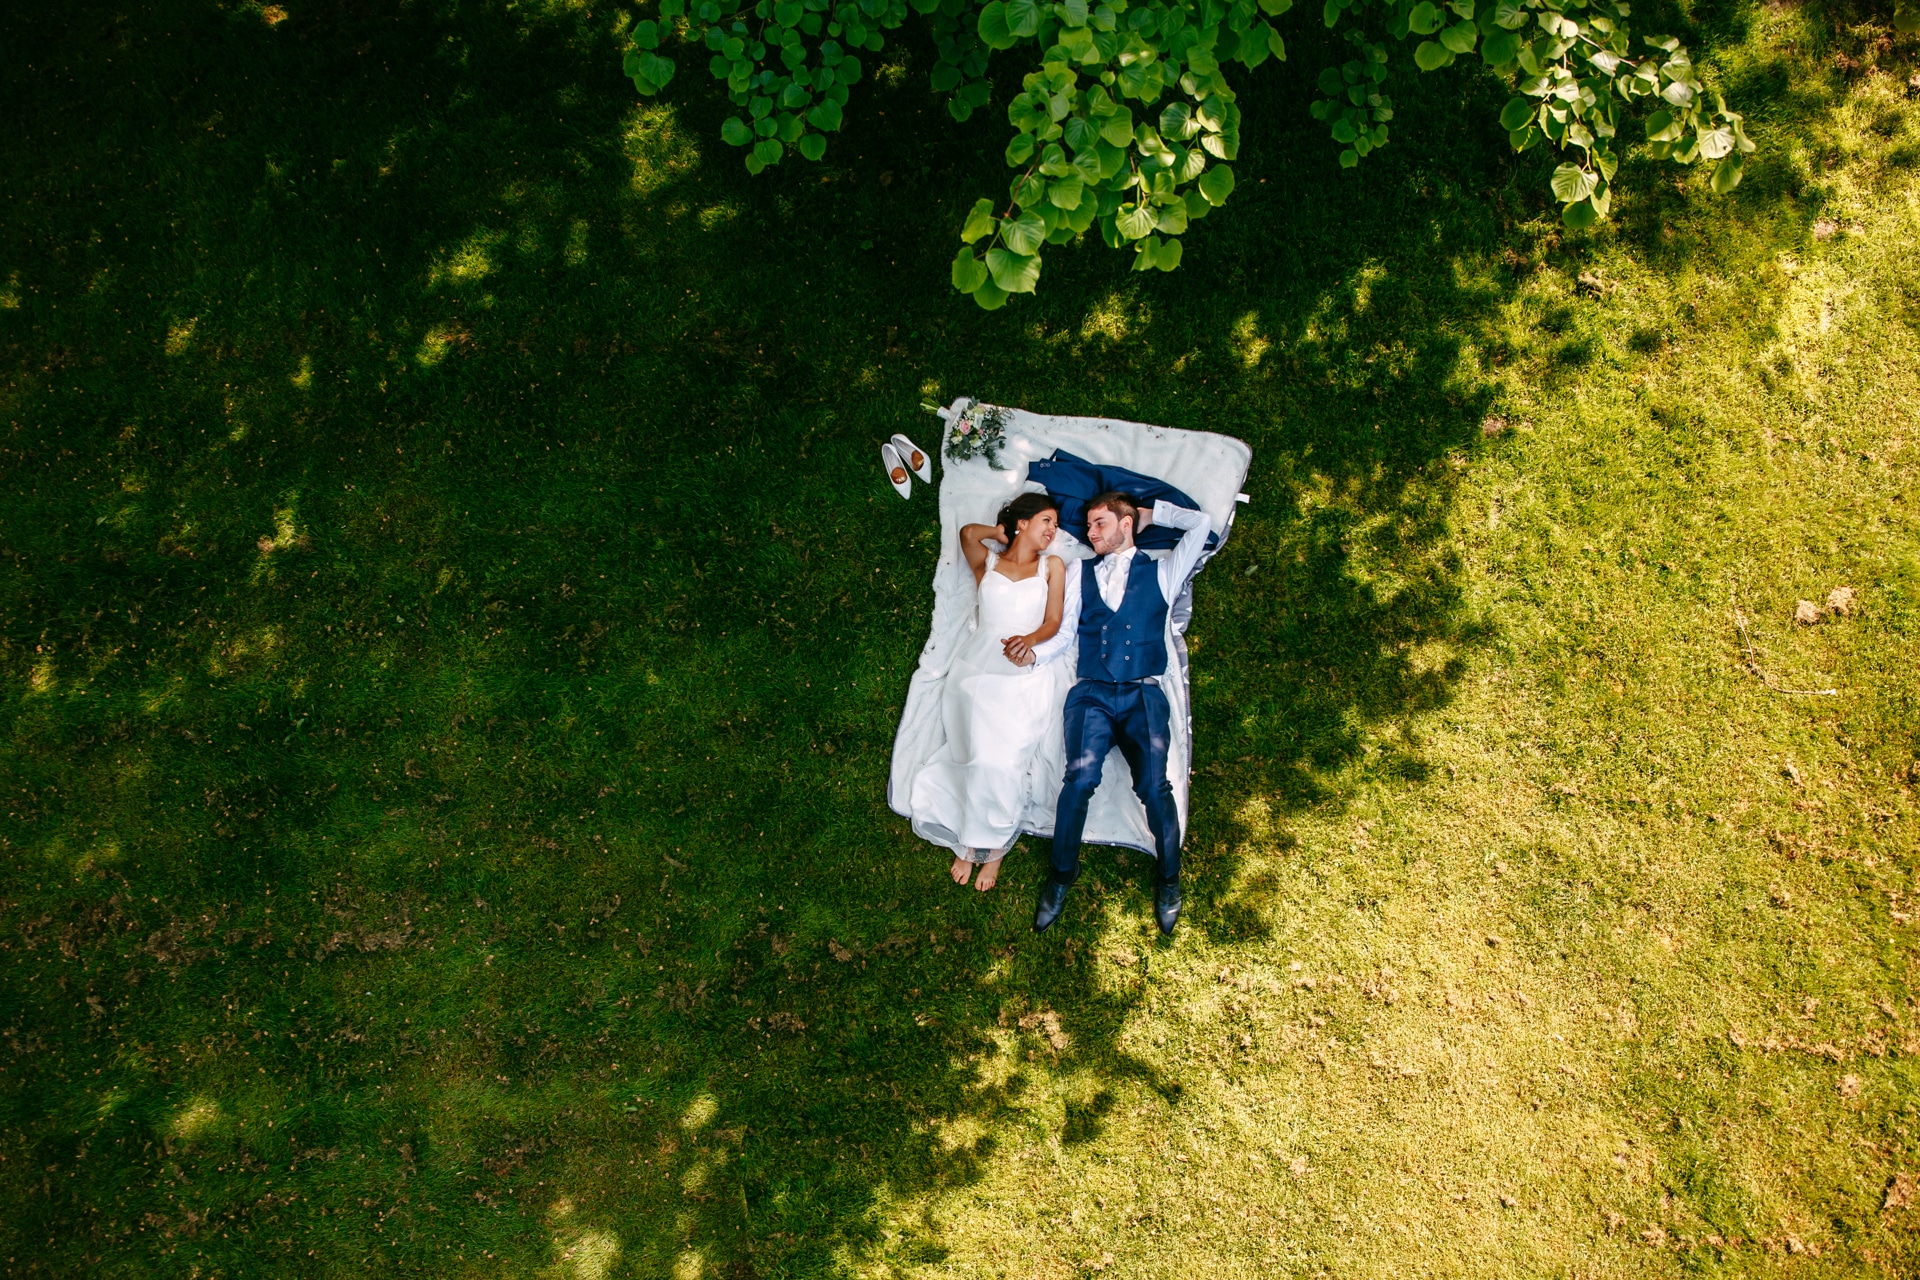 A married couple lying on the grass in the forest.